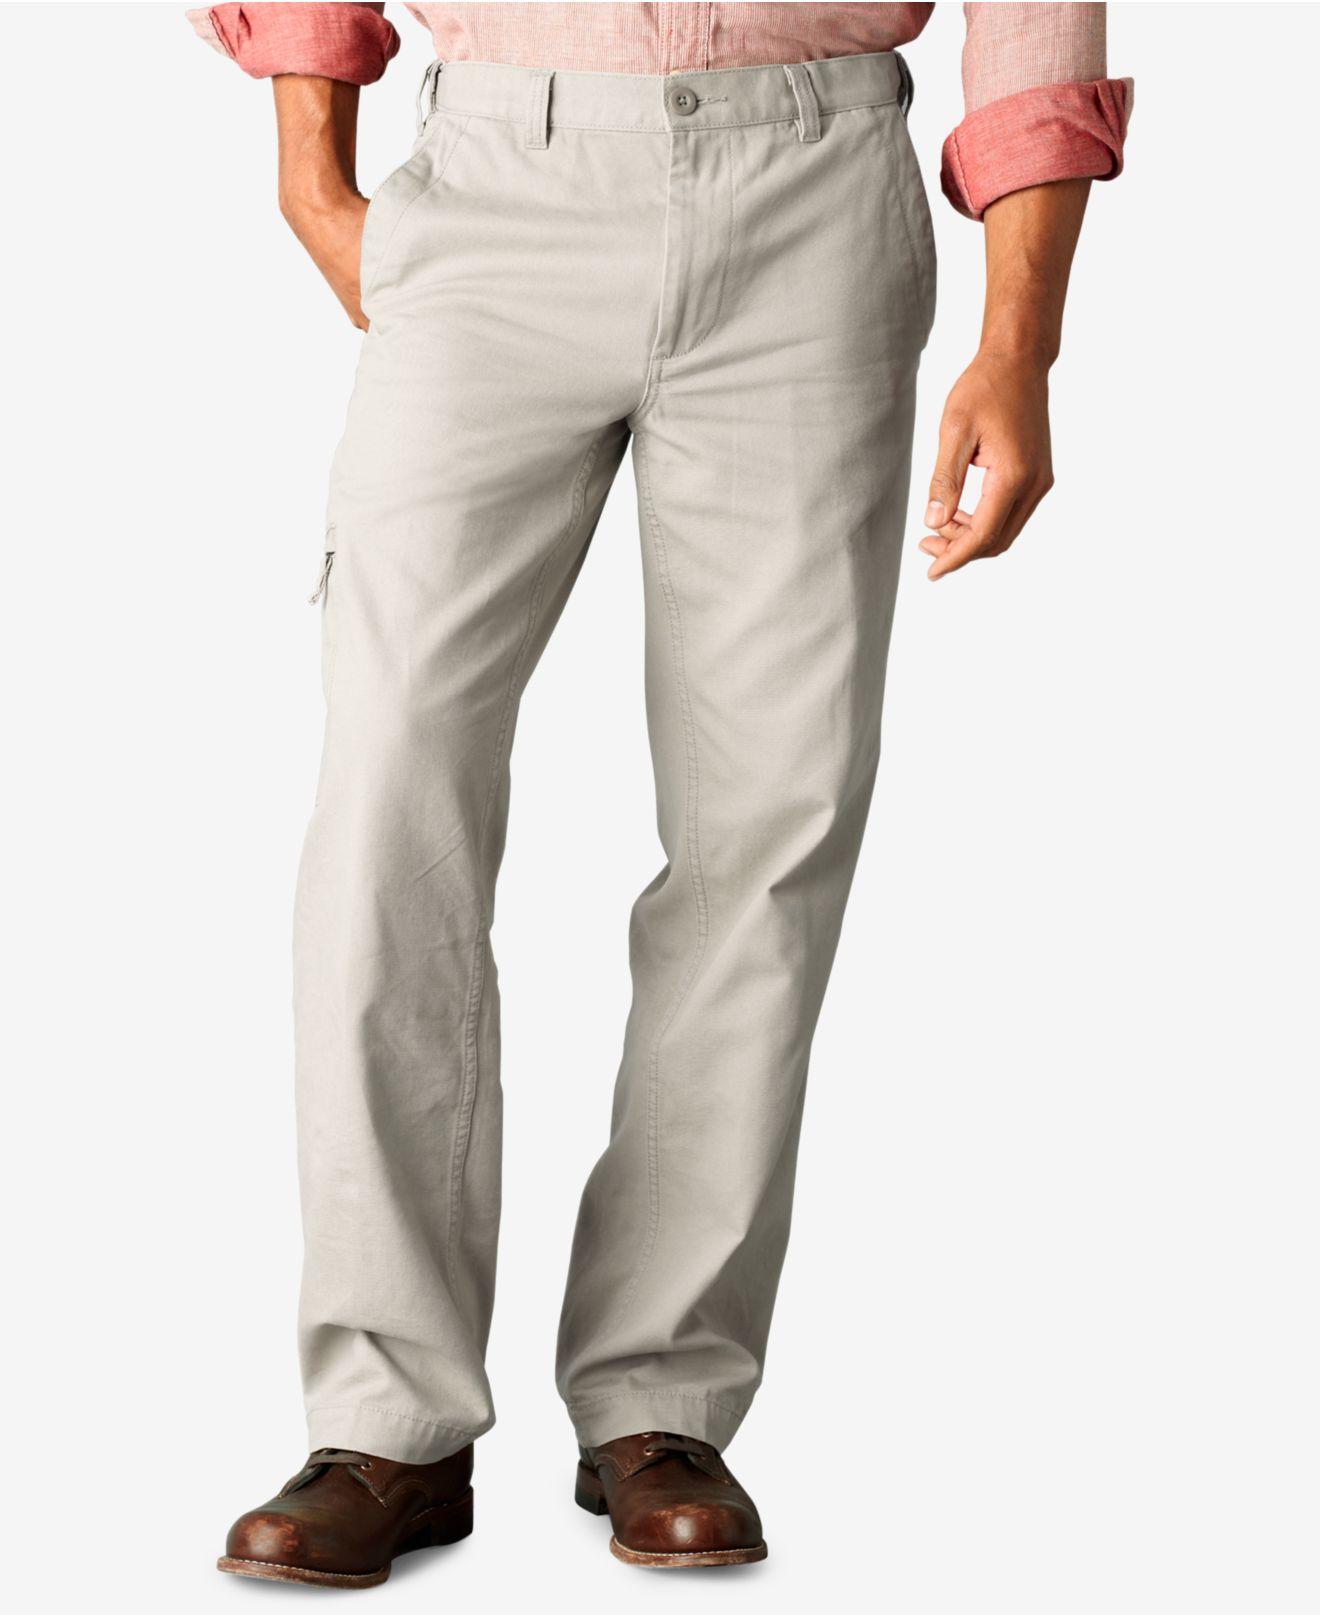 Dockers Classic Fit Cargo Pants Top Sellers, SAVE 45% 